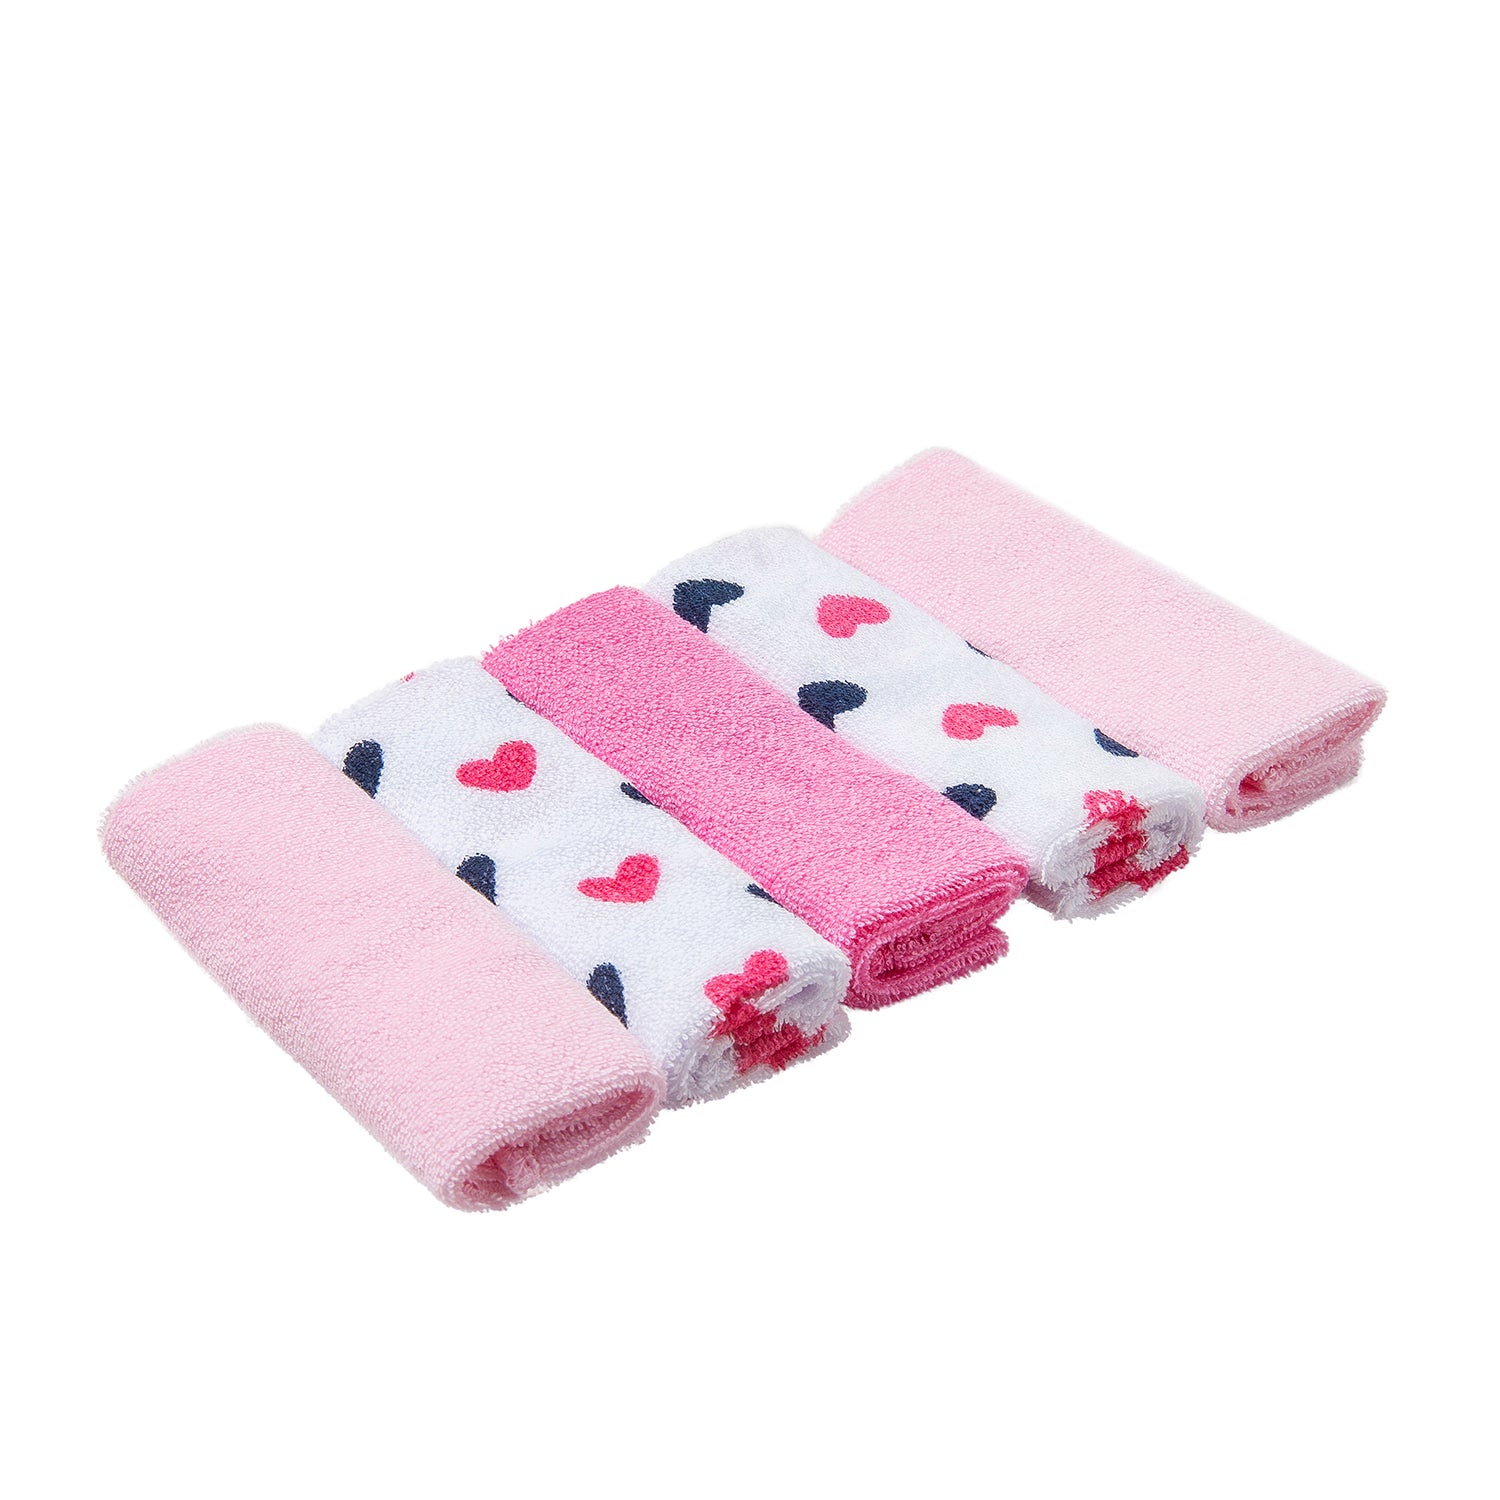 Baby Moo Hooded Towel And 5 Wash Cloth Gift Set Mrs Fox Heart Pink